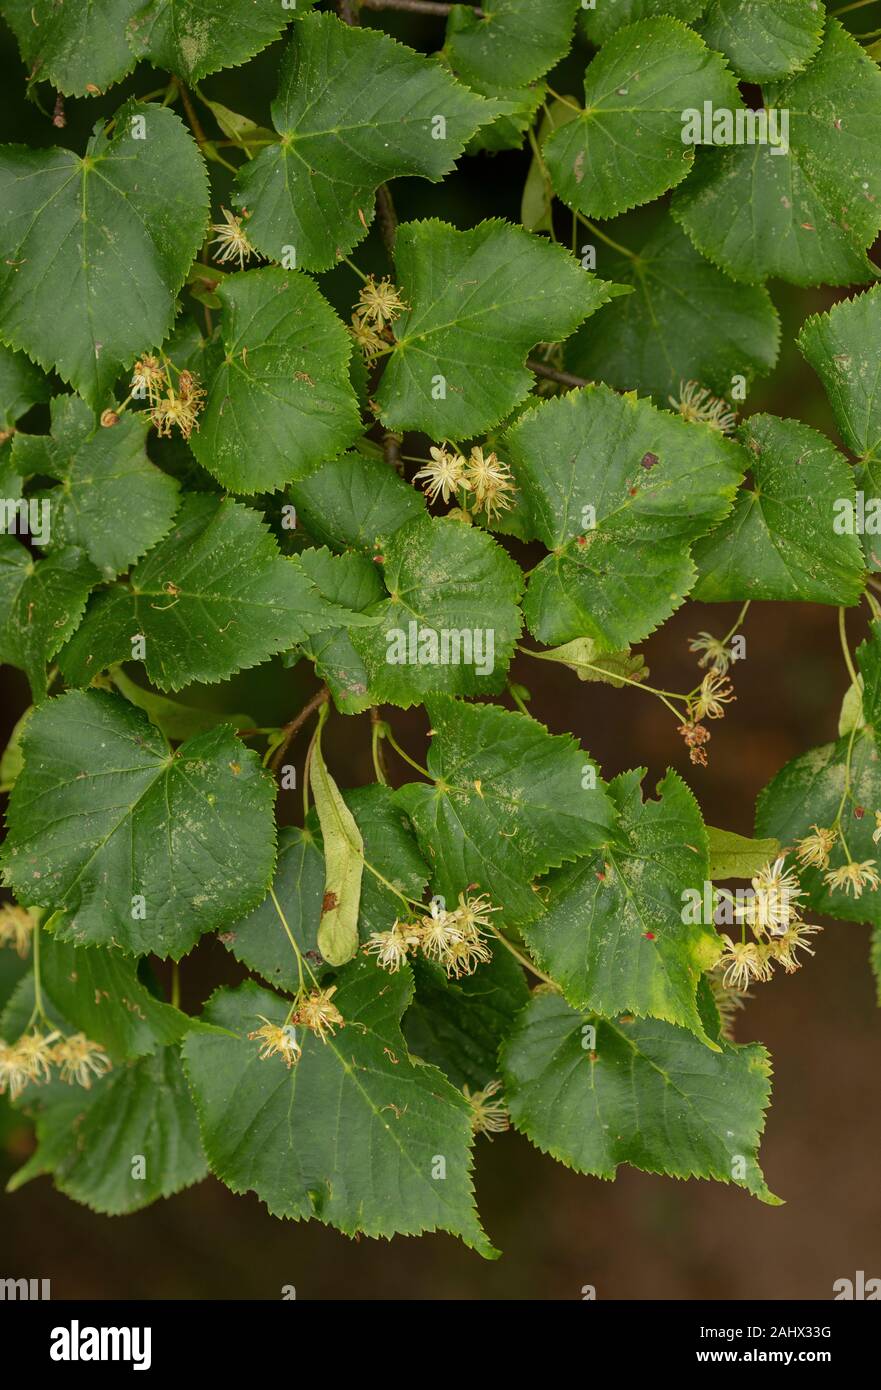 Large-leaved Lime, Tilia platyphyllos in flower. Stock Photo